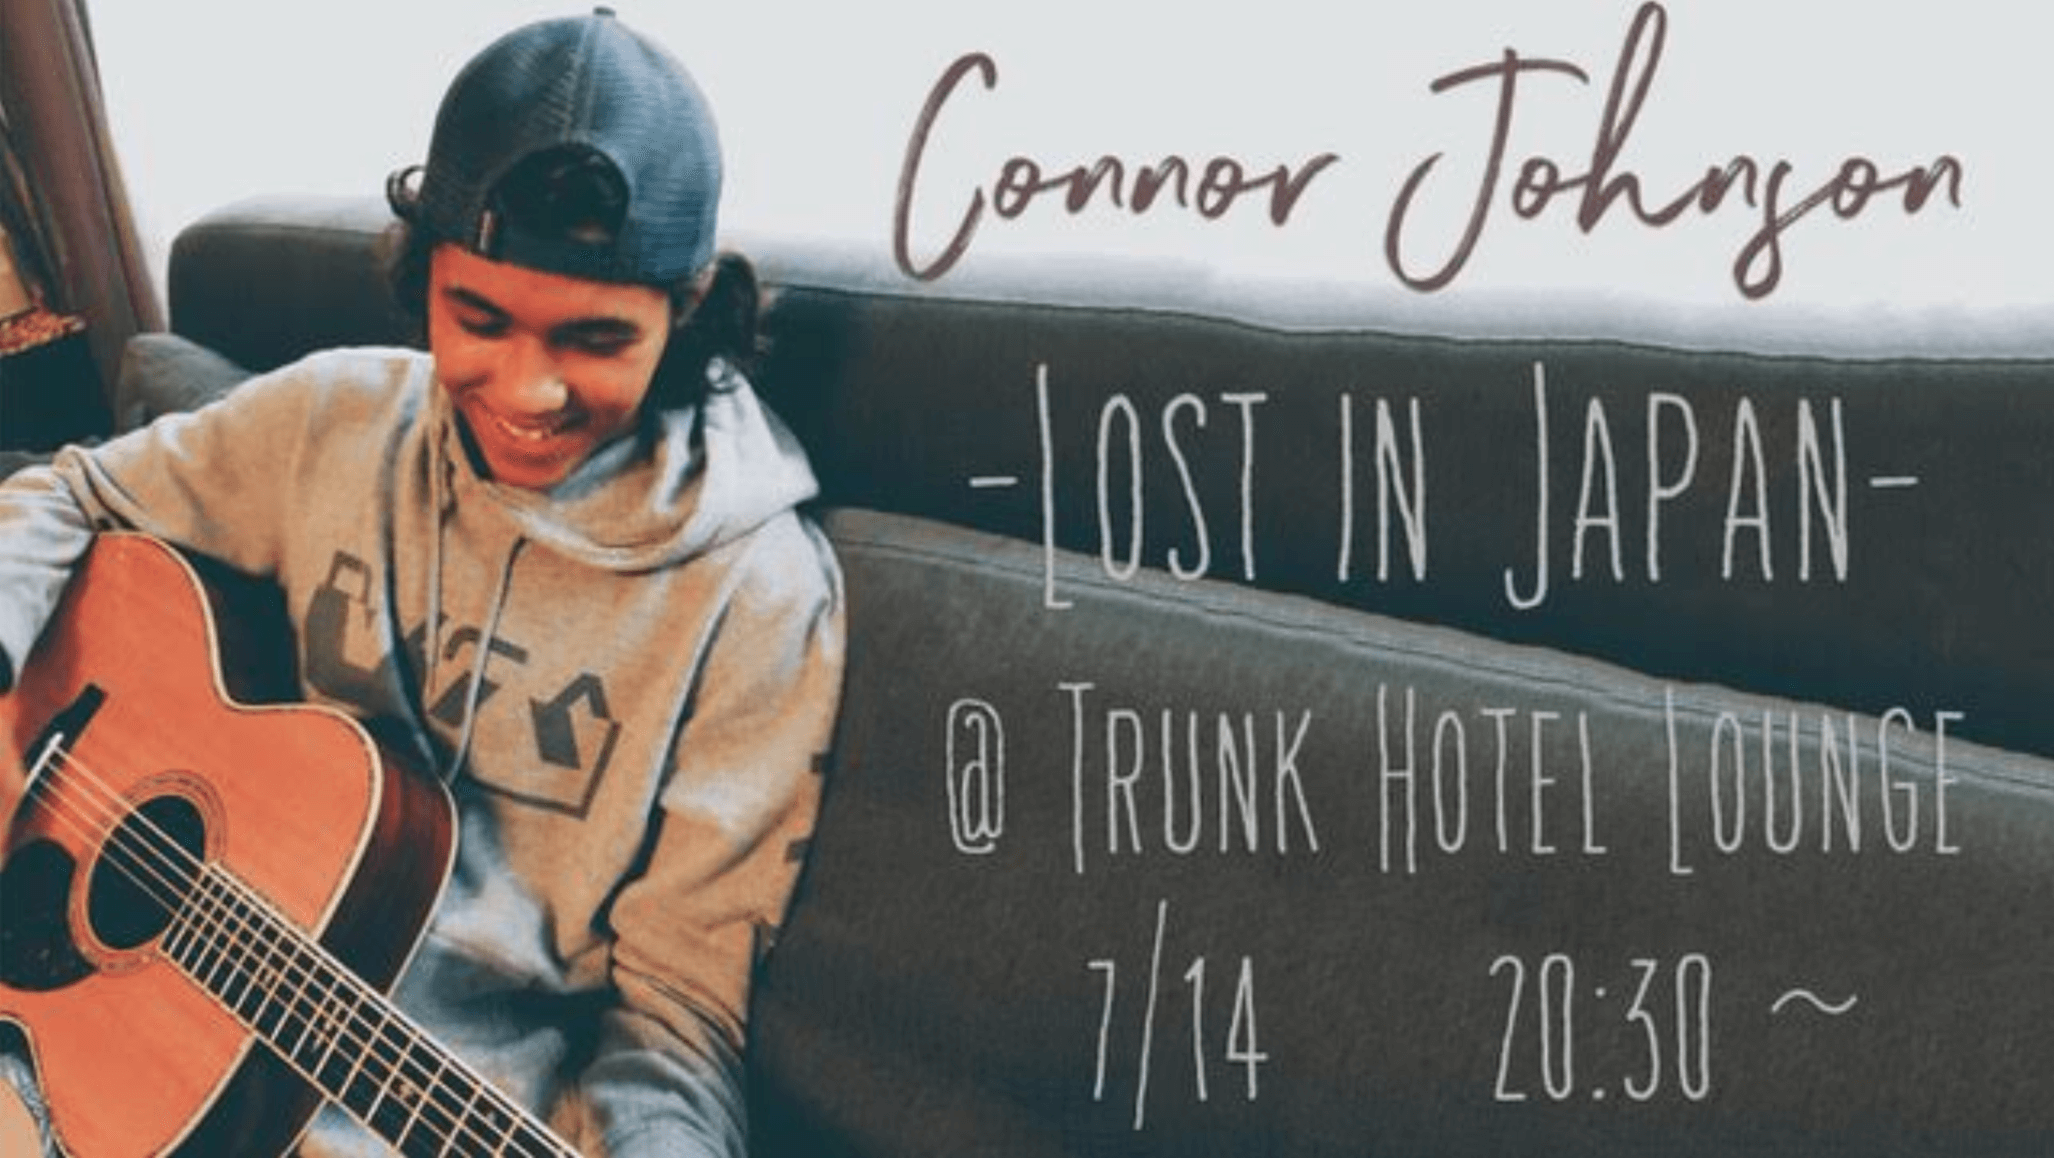 2018.7.14 Connor Johnson - Lost In Japan -